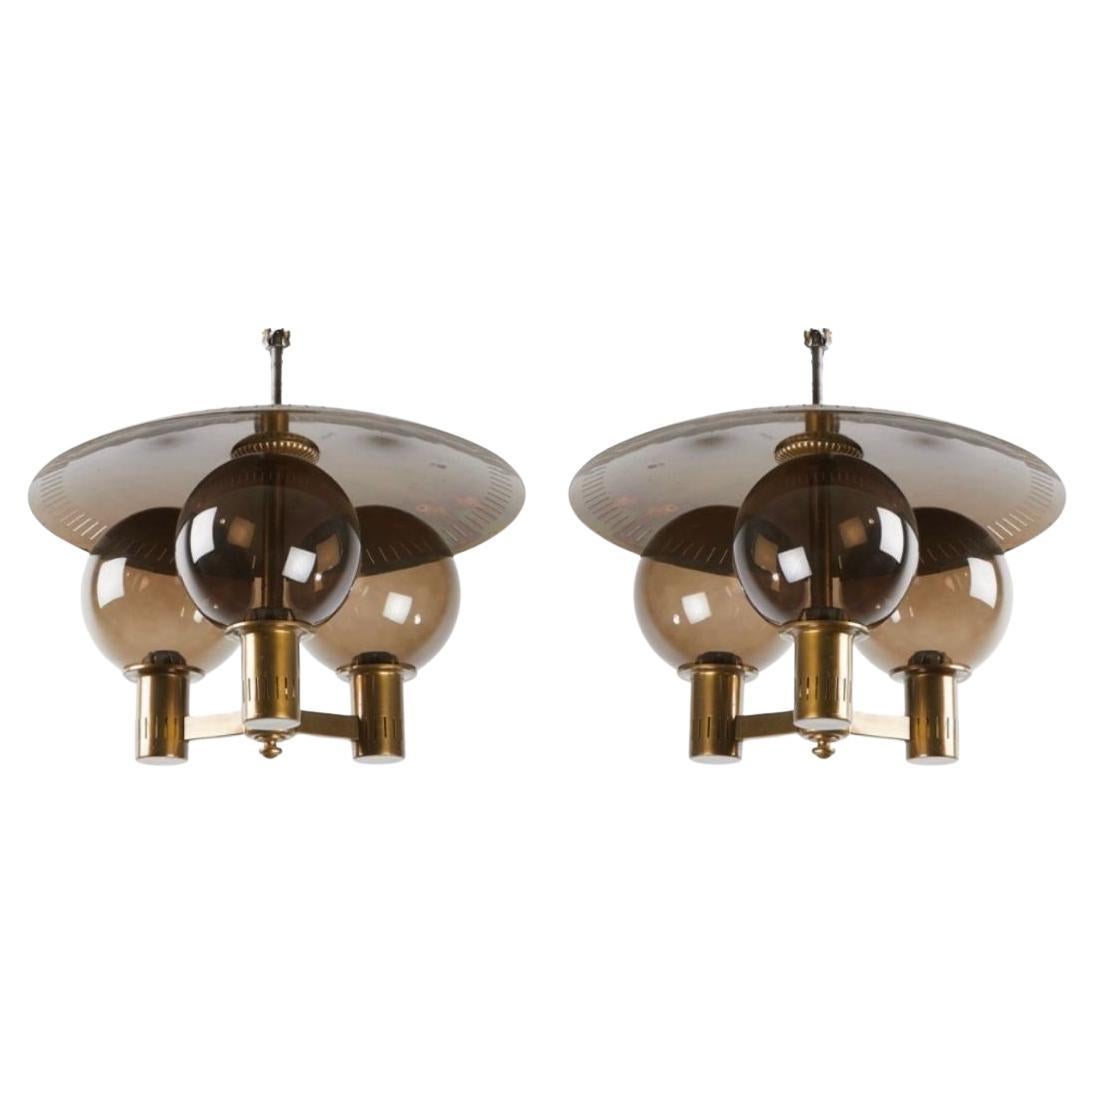 Pair of Swedish Modern Glass and Brass Ceiling Lights